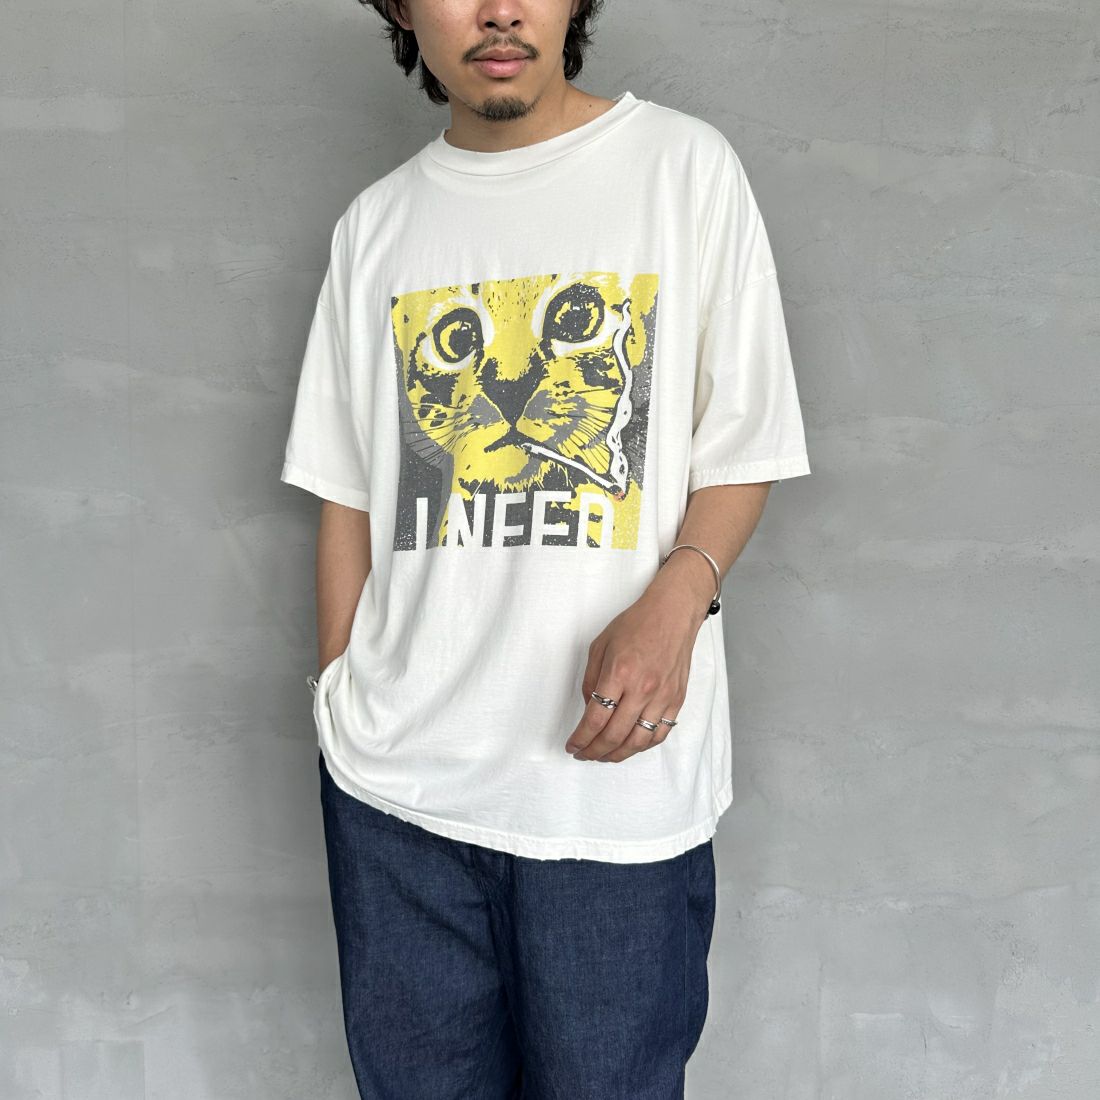 REMI RELIEF [レミレリーフ] 別注 ビッグプリントTシャツ I NEED  [RN26349321-JF]｜ジーンズファクトリー公式通販サイト - JEANS FACTORY Online Shop